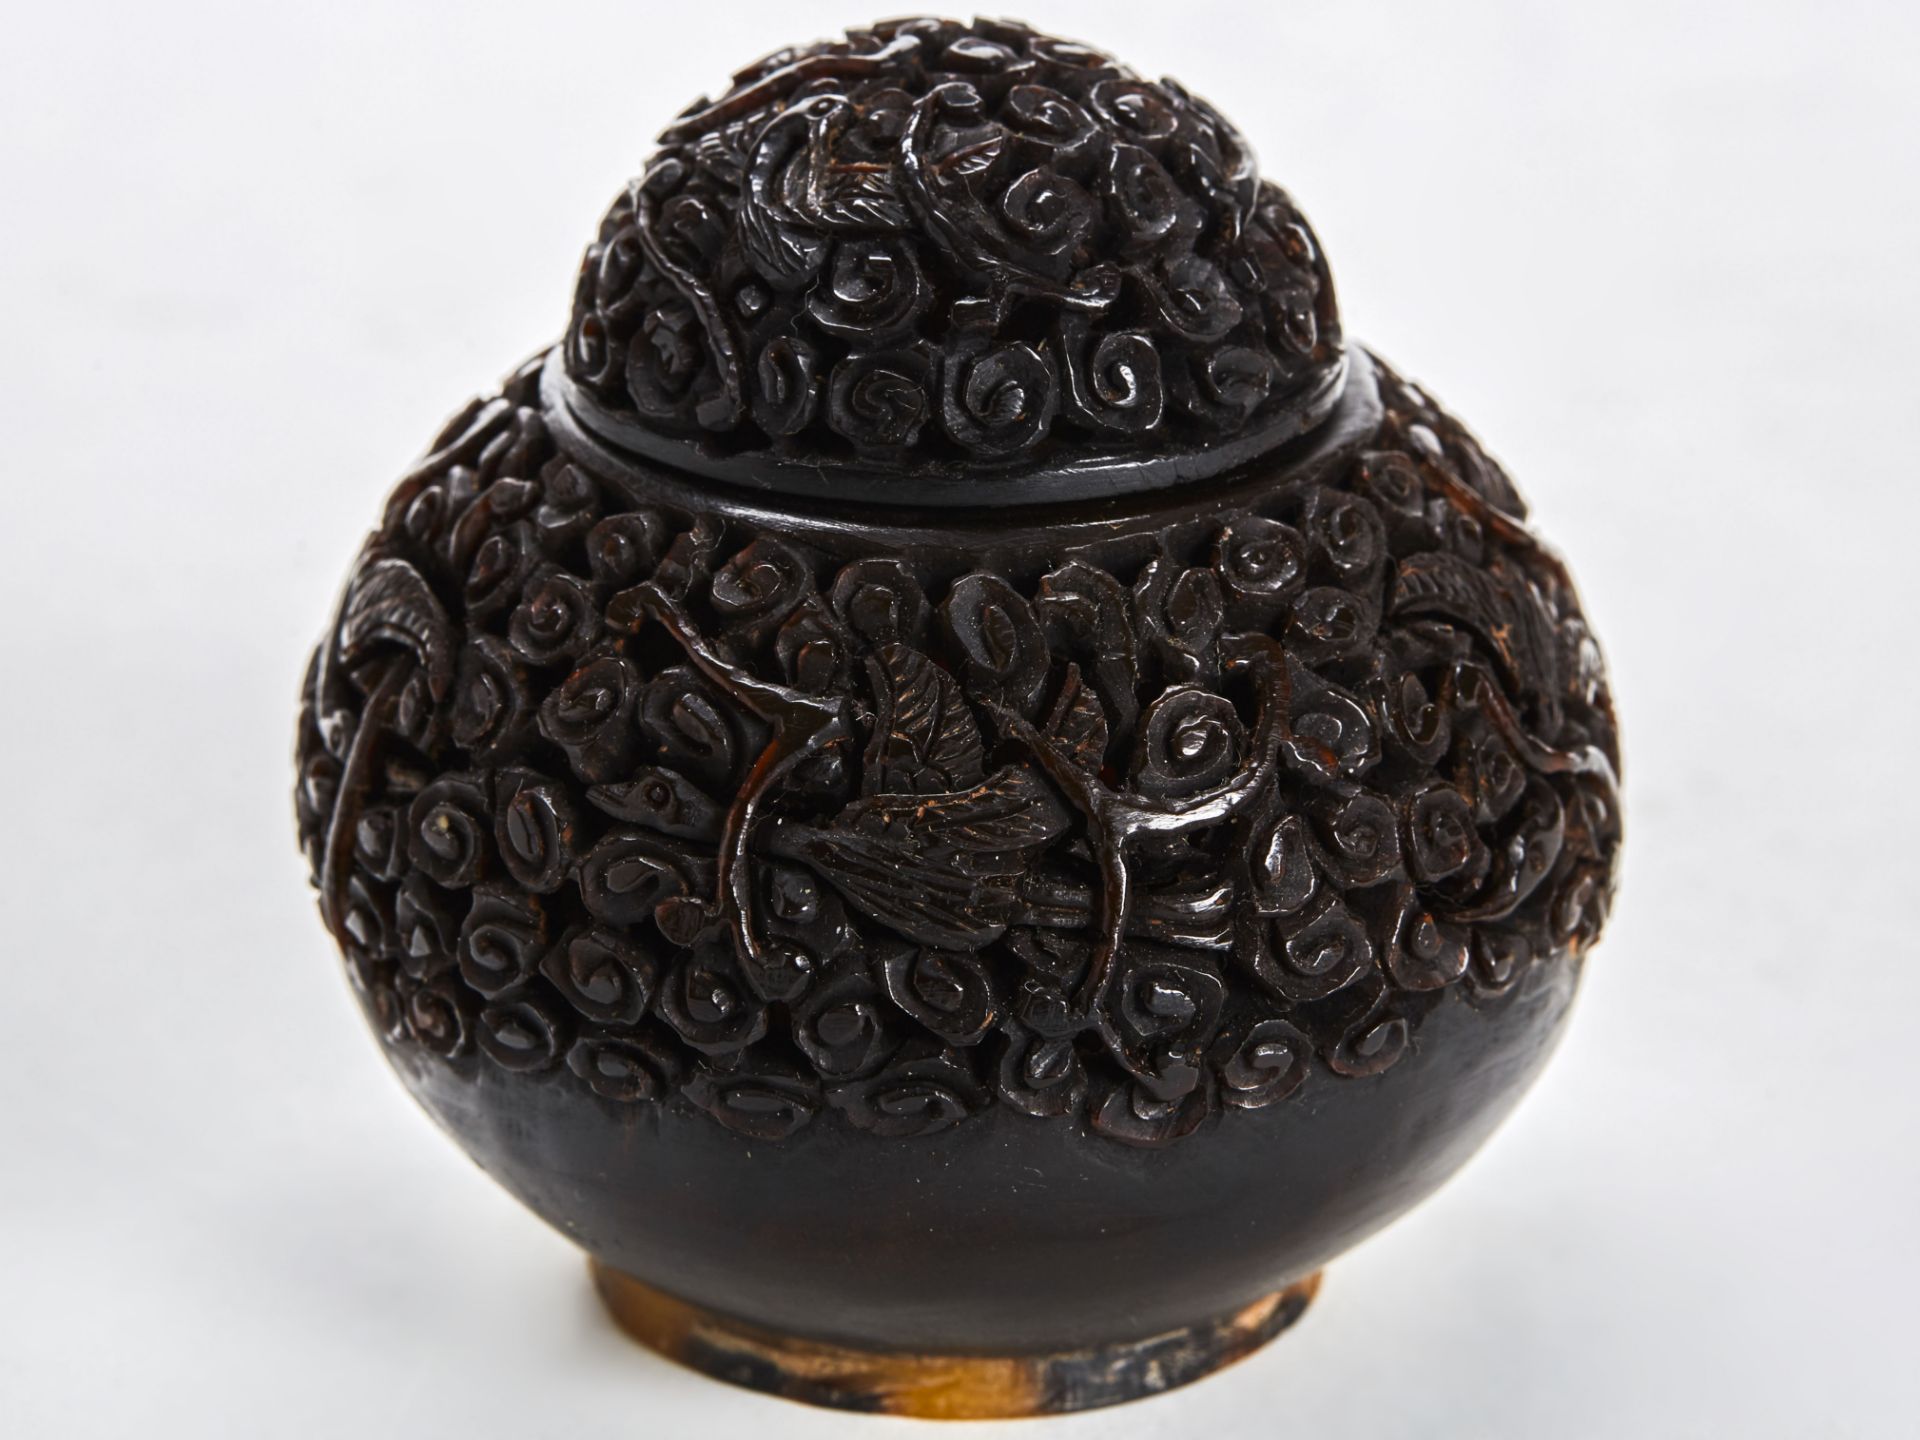 Antique Chinese Carved Reticulated Pot 19/20Th C. - Image 2 of 6